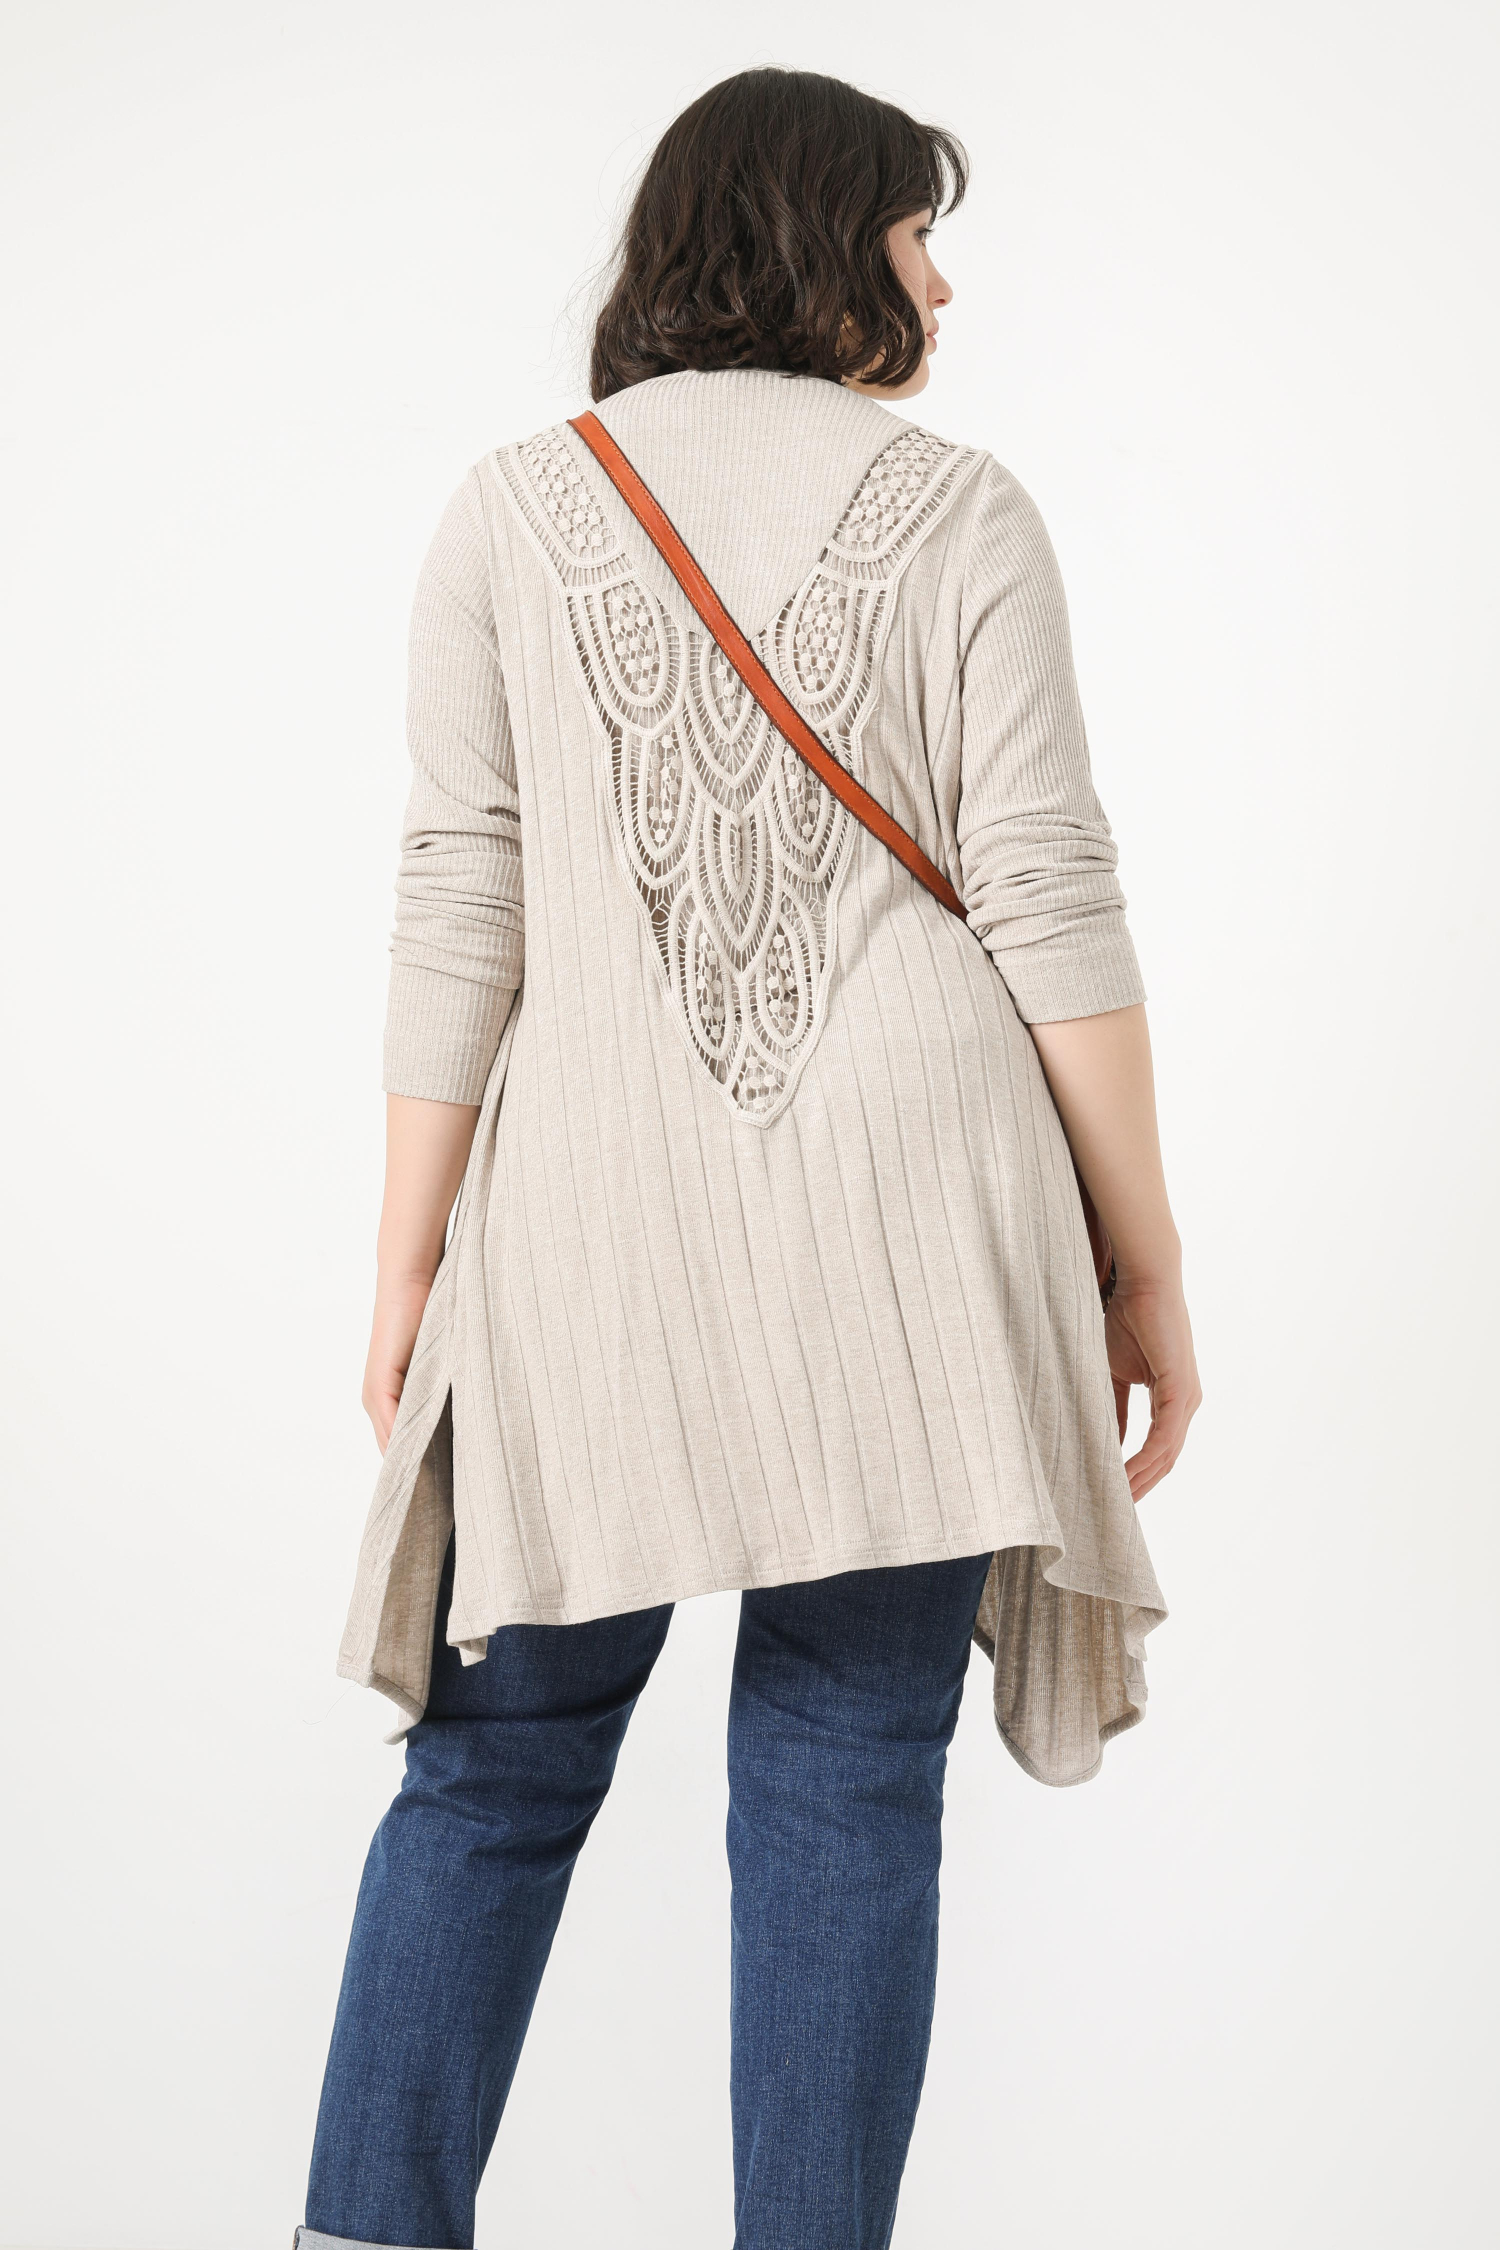 Ribbed knit vest and top set (shipping January 20/25)